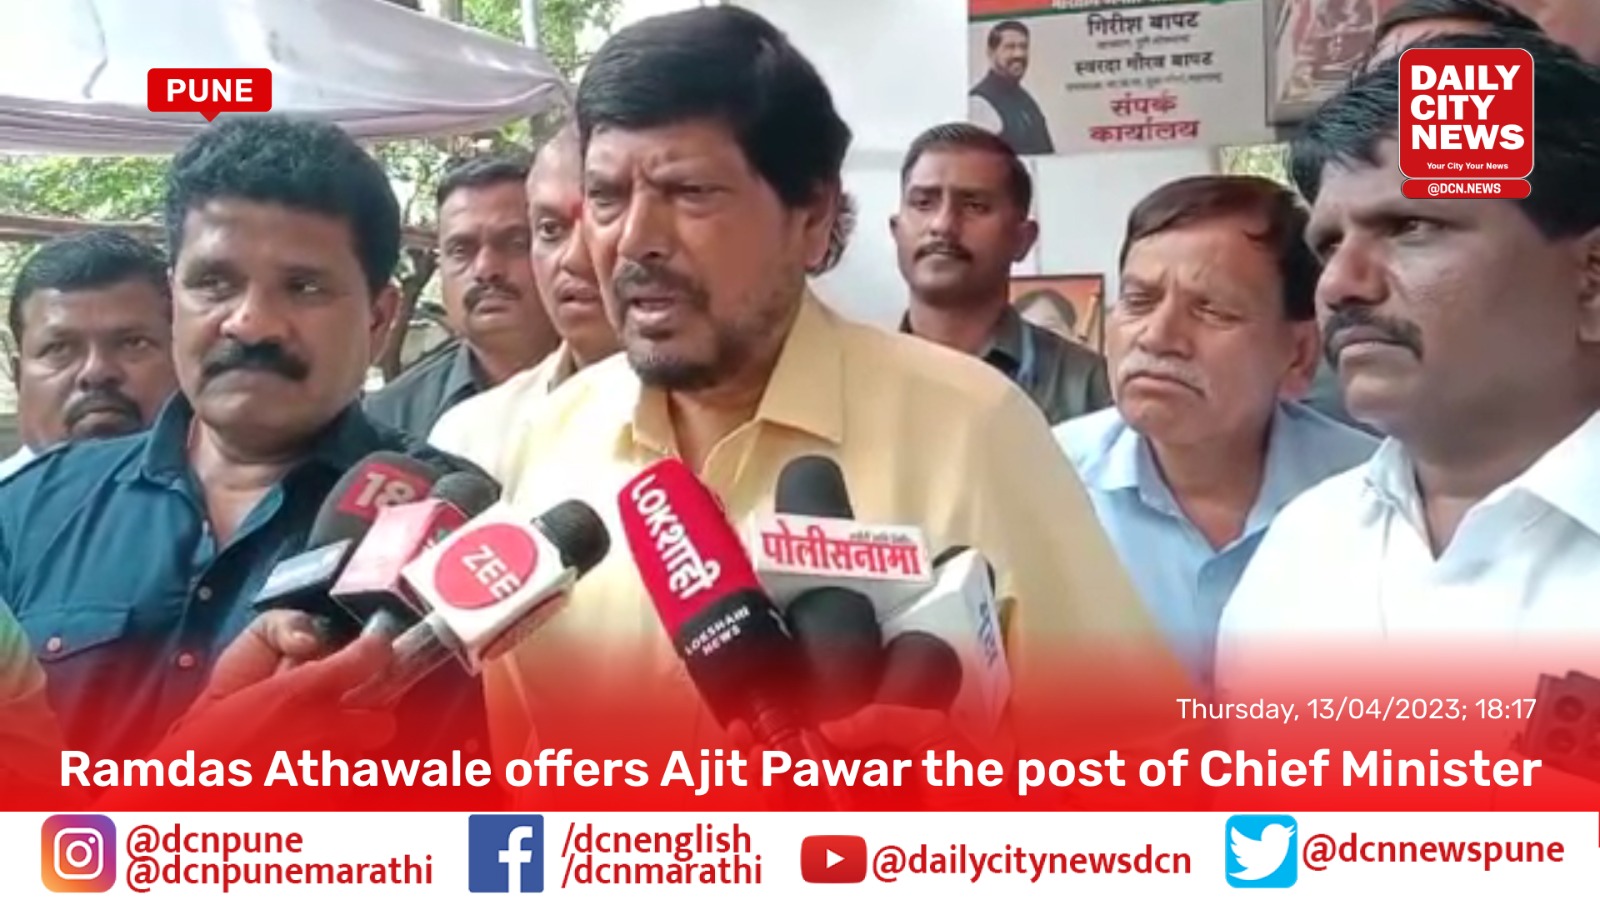 Ramdas Athawale offers Ajit Pawar the post of Chief Minister